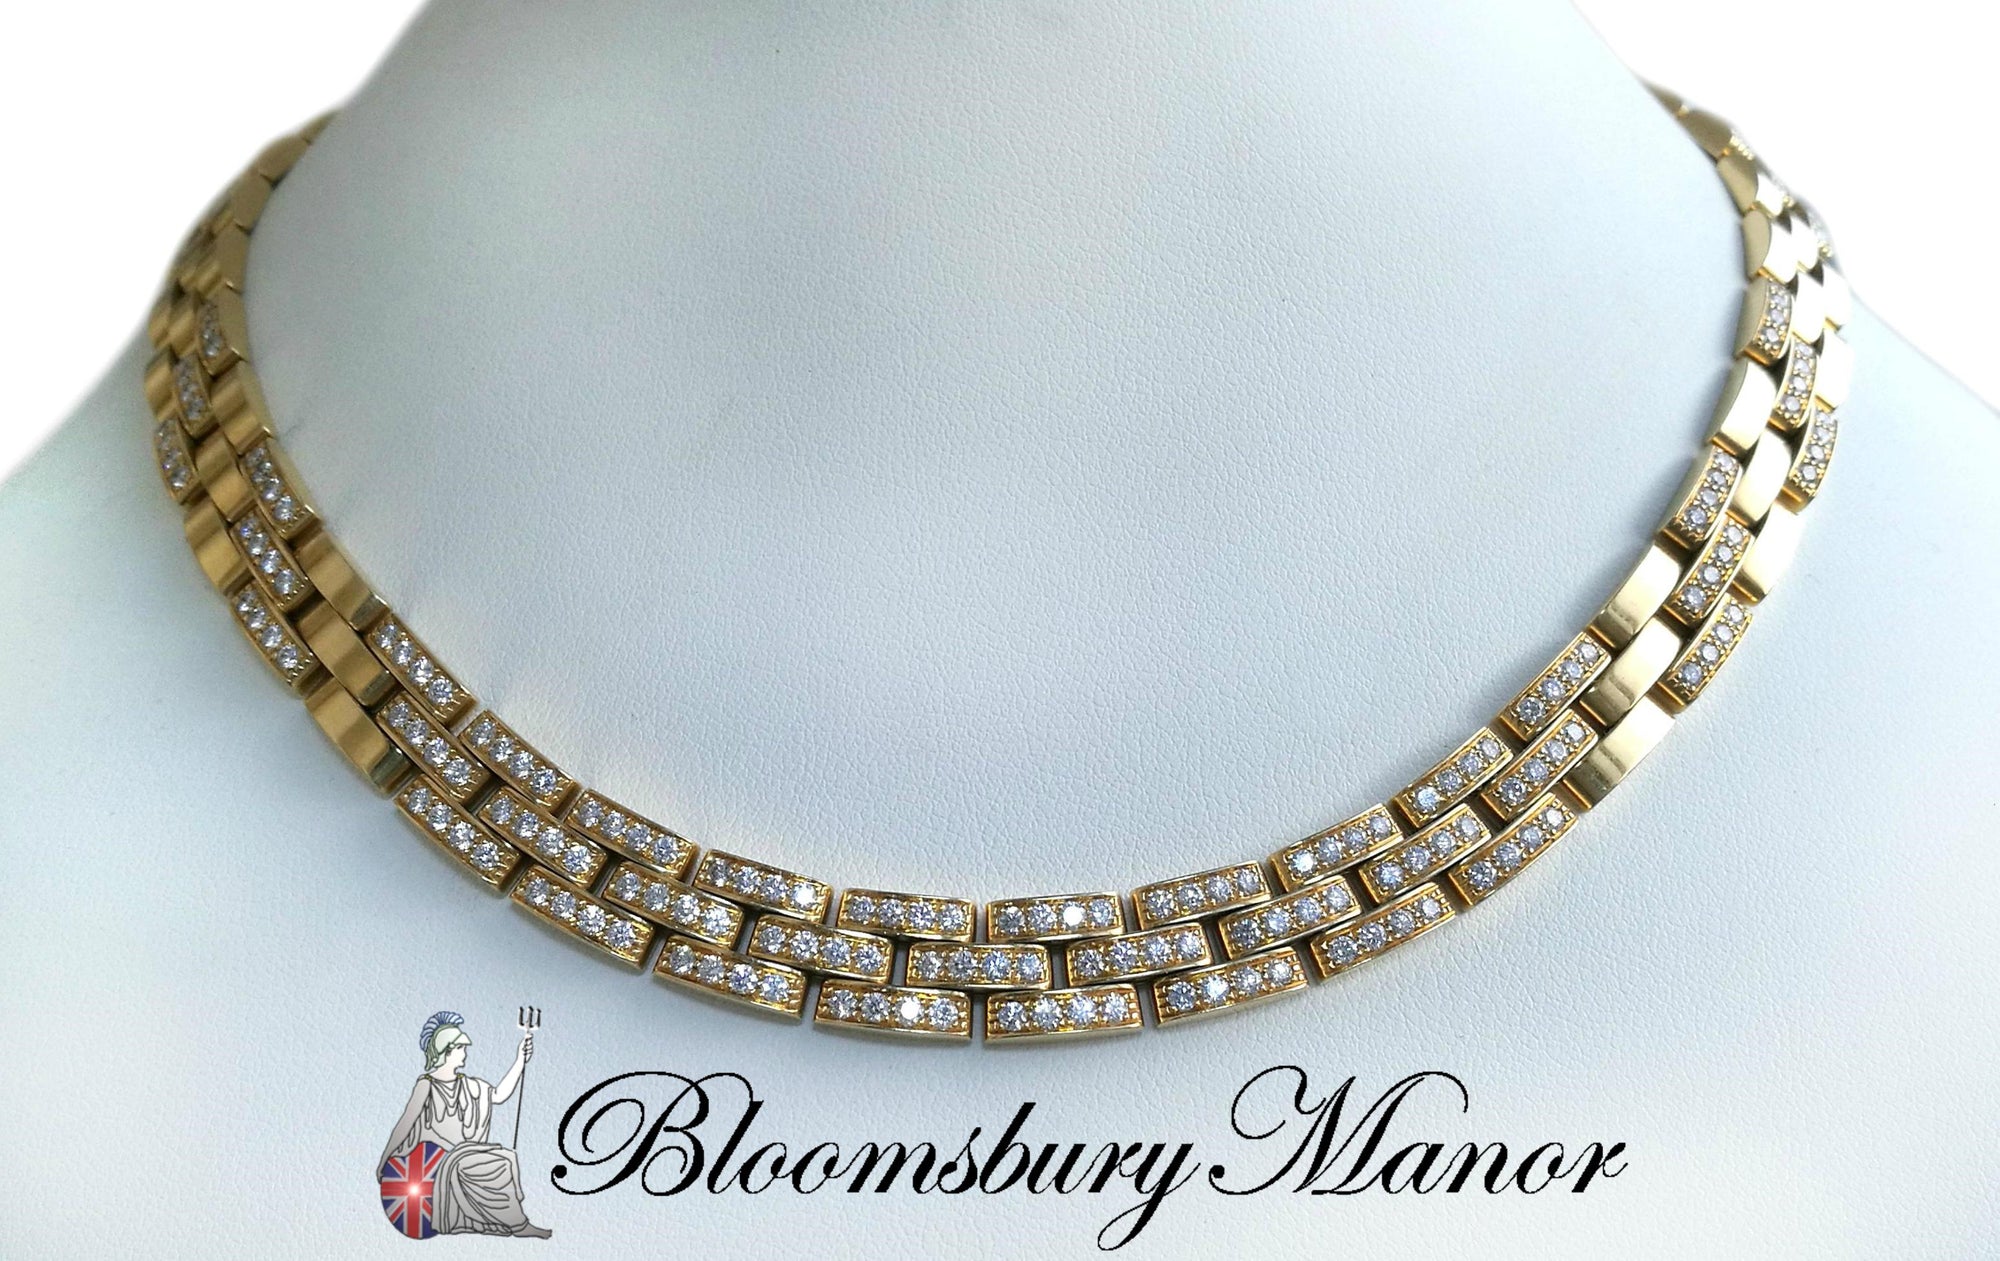 Second Hand Pre-owned Cartier Maillon Panthere Diamond Necklace